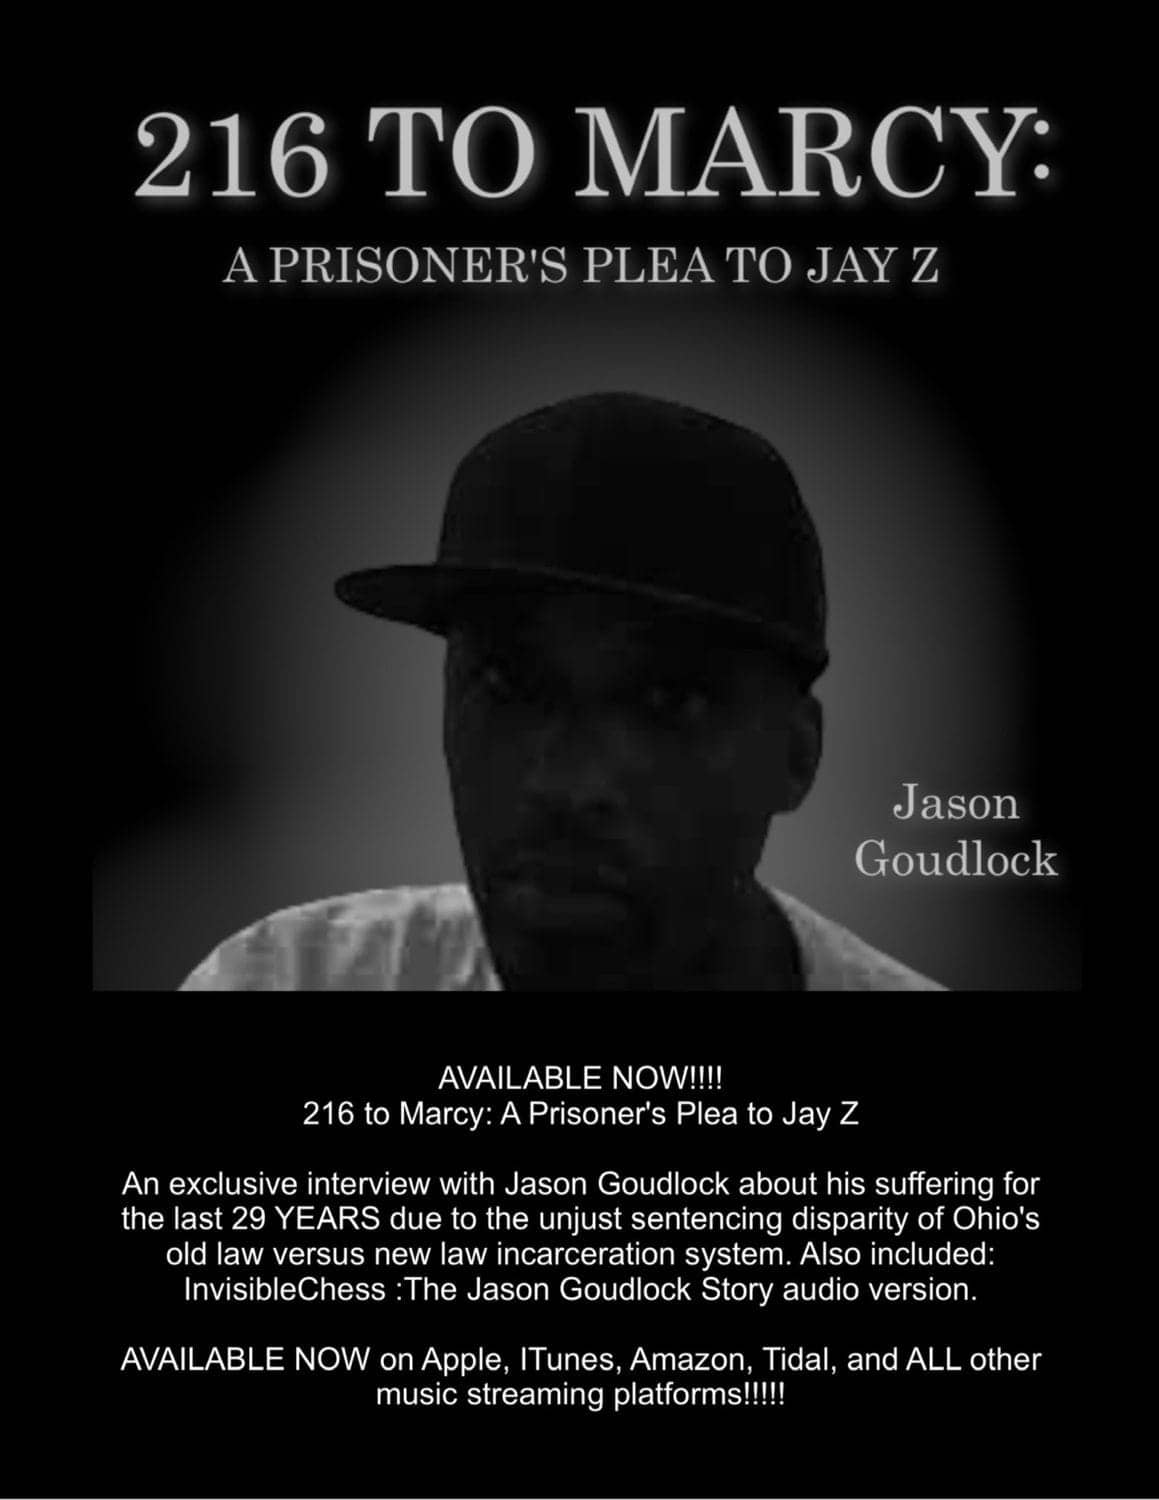 216-to-Marcy-A-Prisoners-Plea-to-Jay-Z-poster, Ohio’s ‘old law’ prisoners deserve freedom now, Abolition Now! 